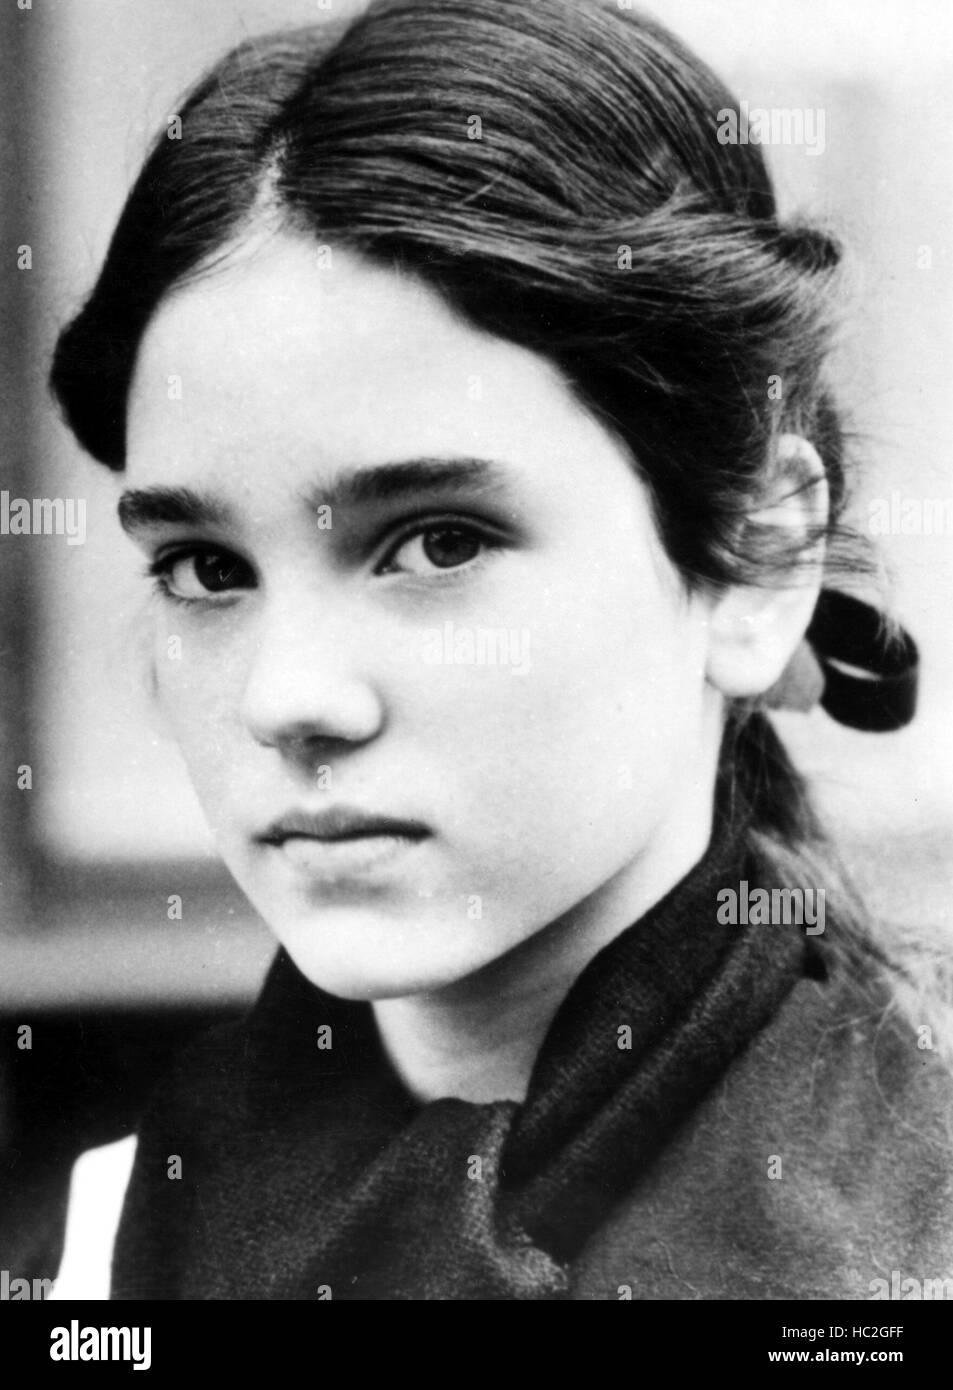 ONCE UPON A TIME IN AMERICA, Jennifer Connelly, 1984 Stock Photo - Alamy